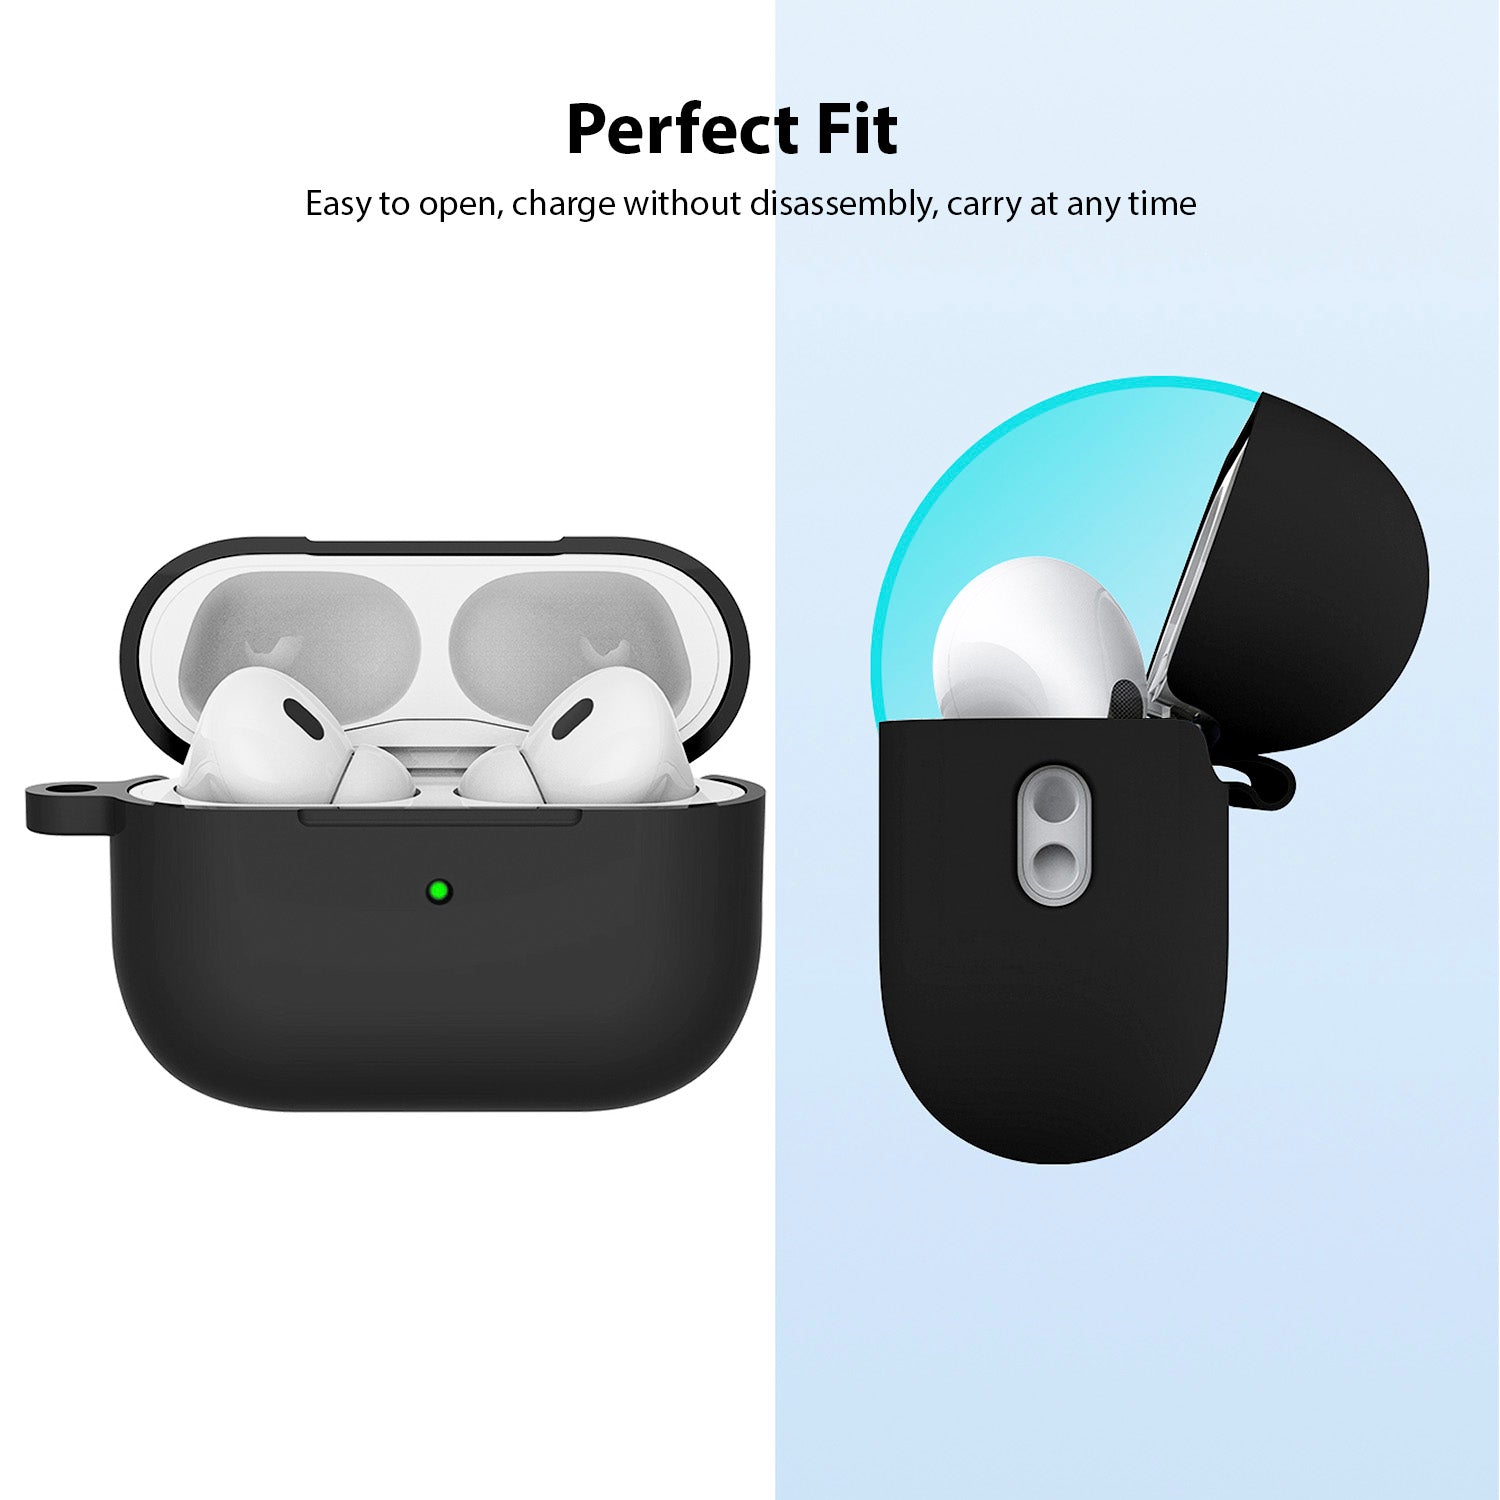 Tough On Apple AirPods Pro 2 Triple-Layer Protective Silicone Case Black